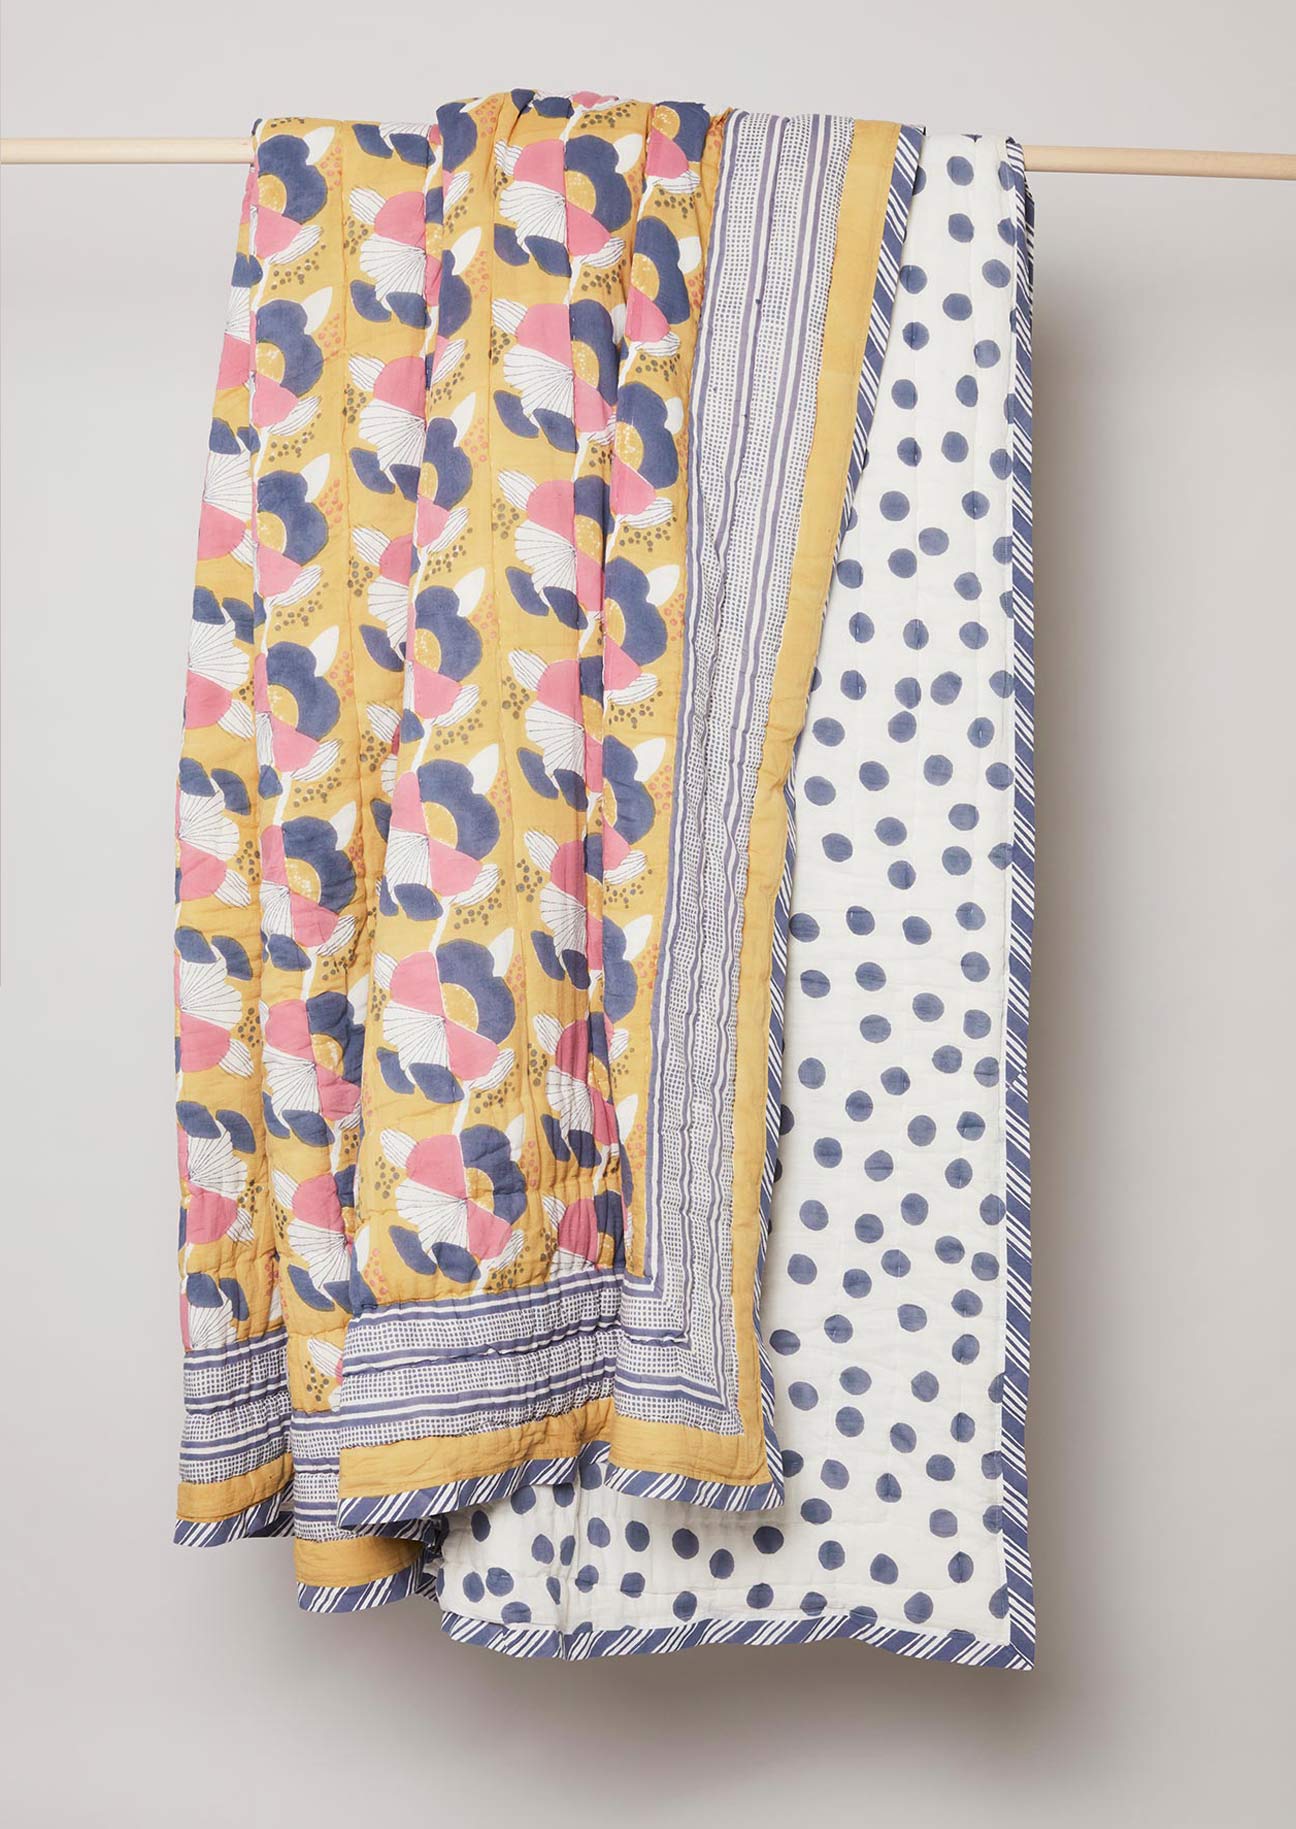 Yellow, blue and pink floral block printed quilt with stripe edge design and navy polka dot reverse.